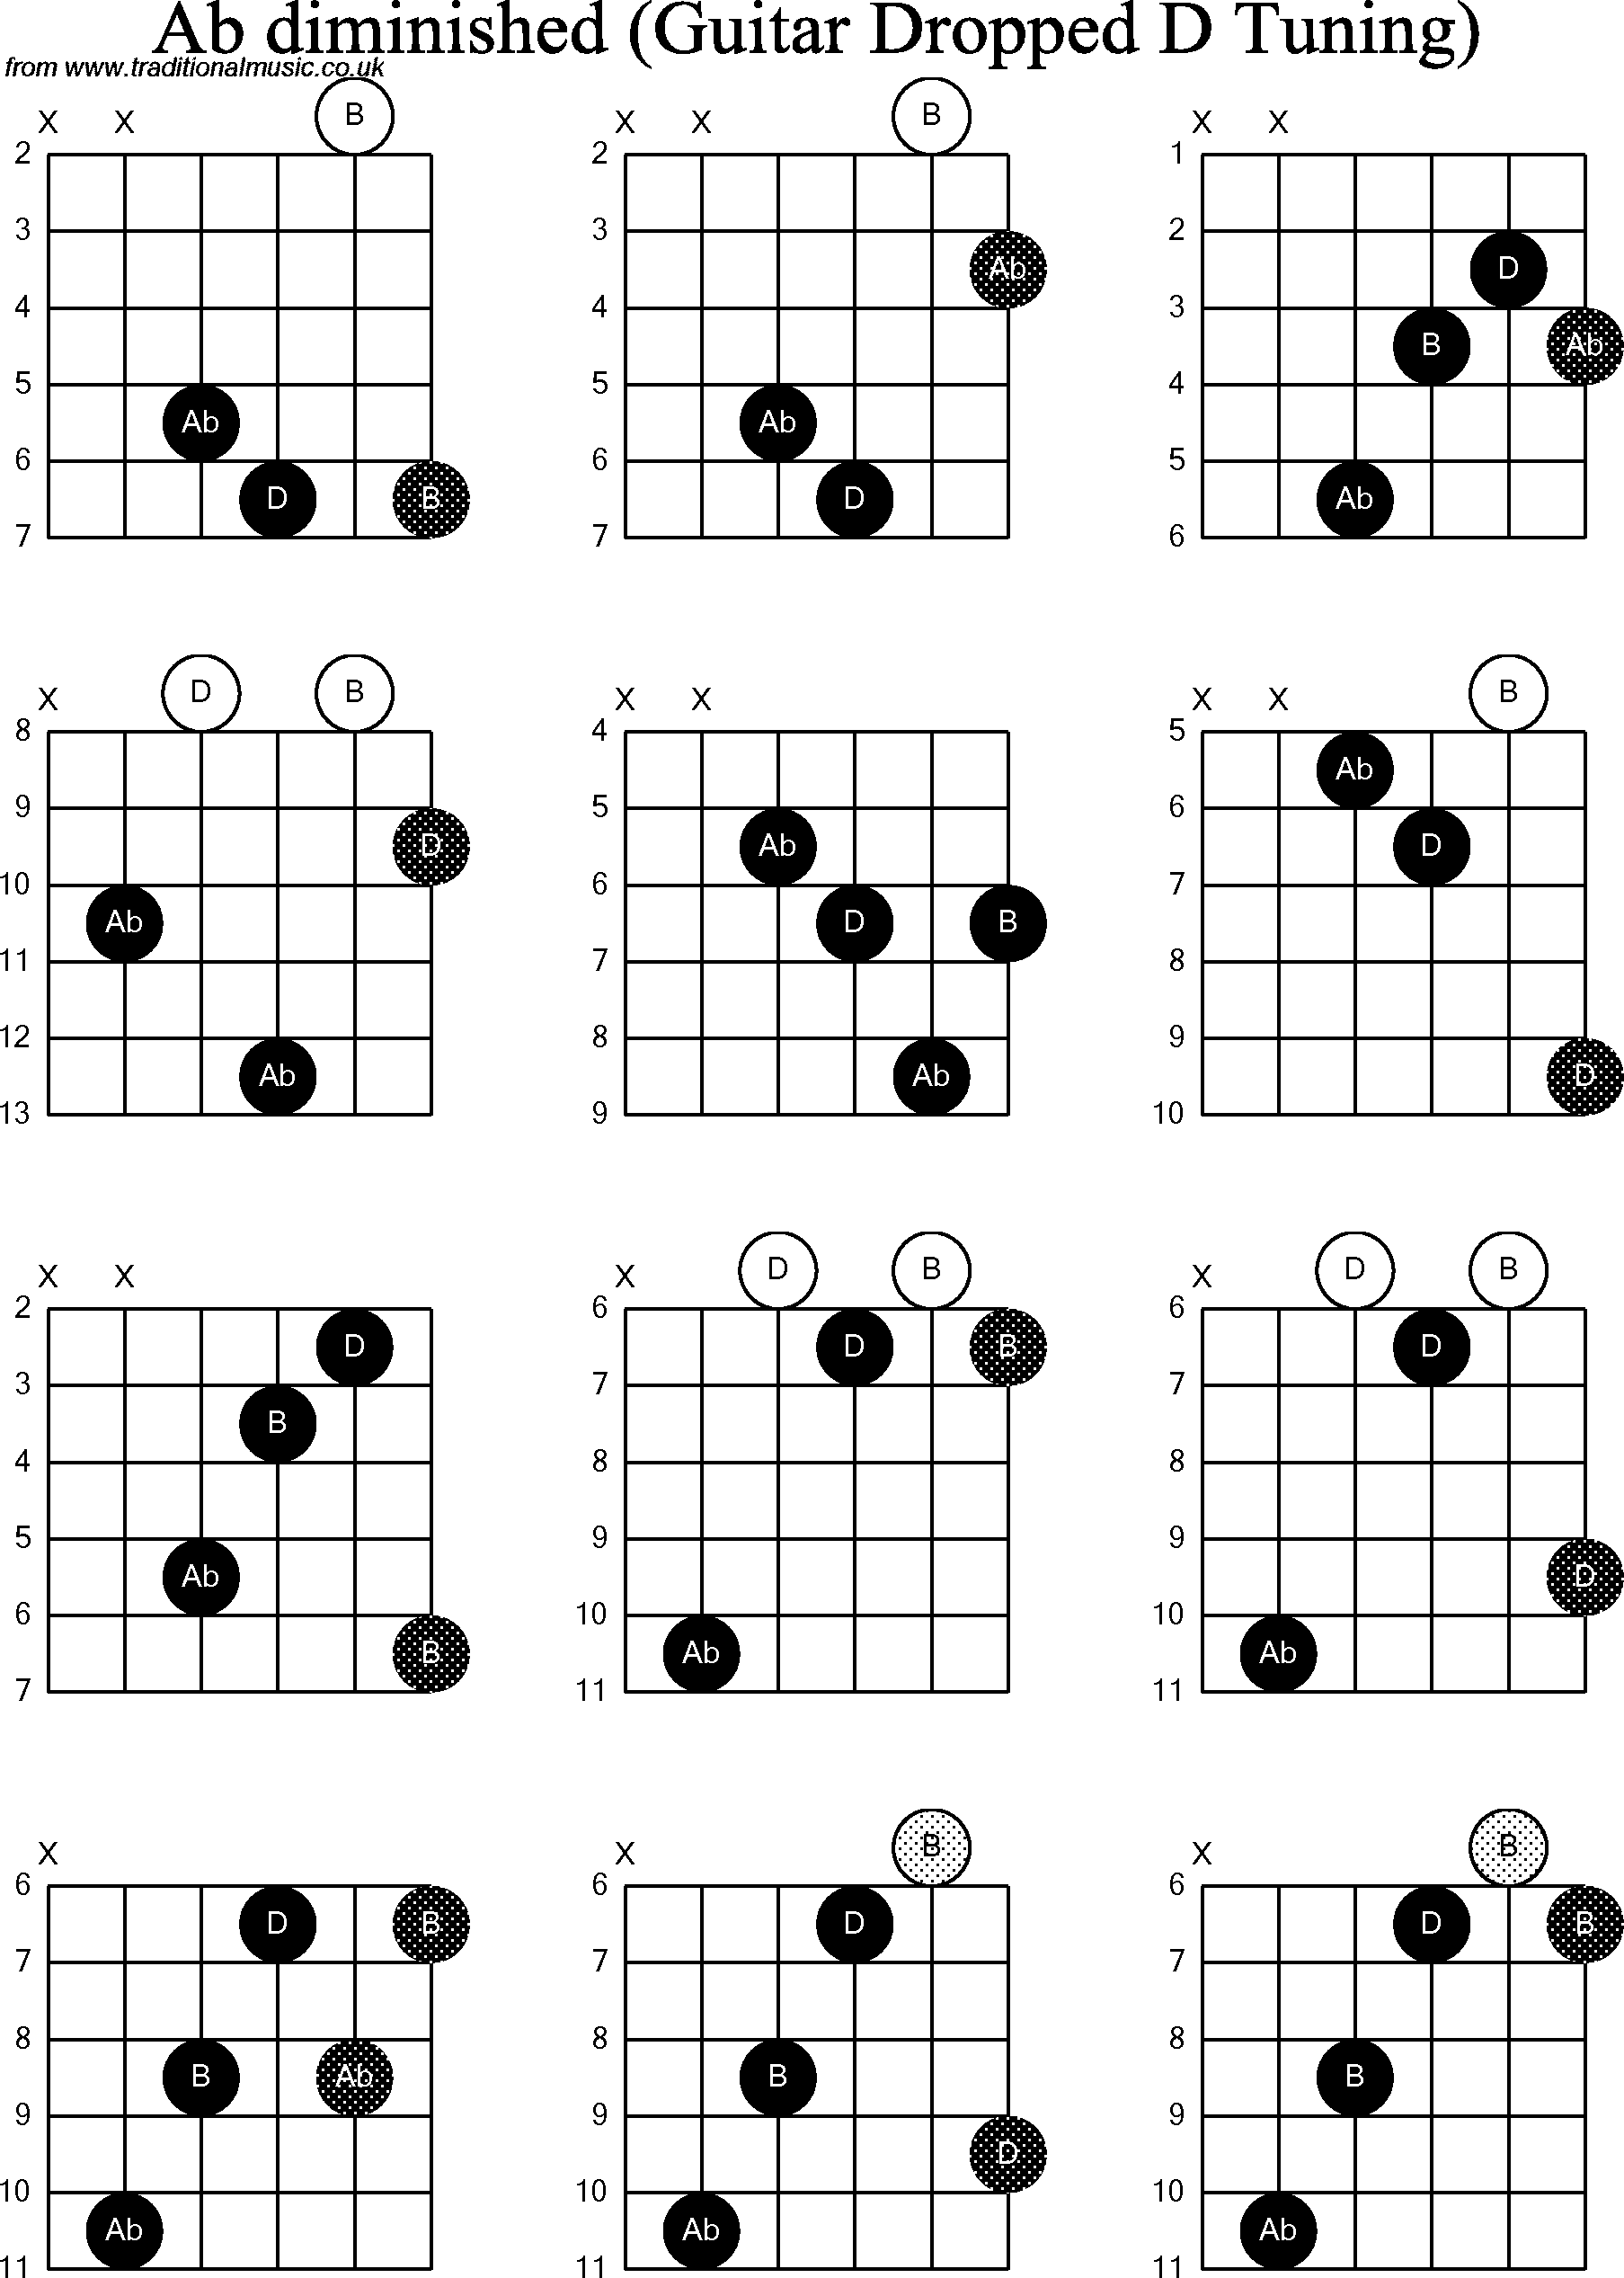 Chord diagrams for dropped D Guitar(DADGBE), Ab Diminished